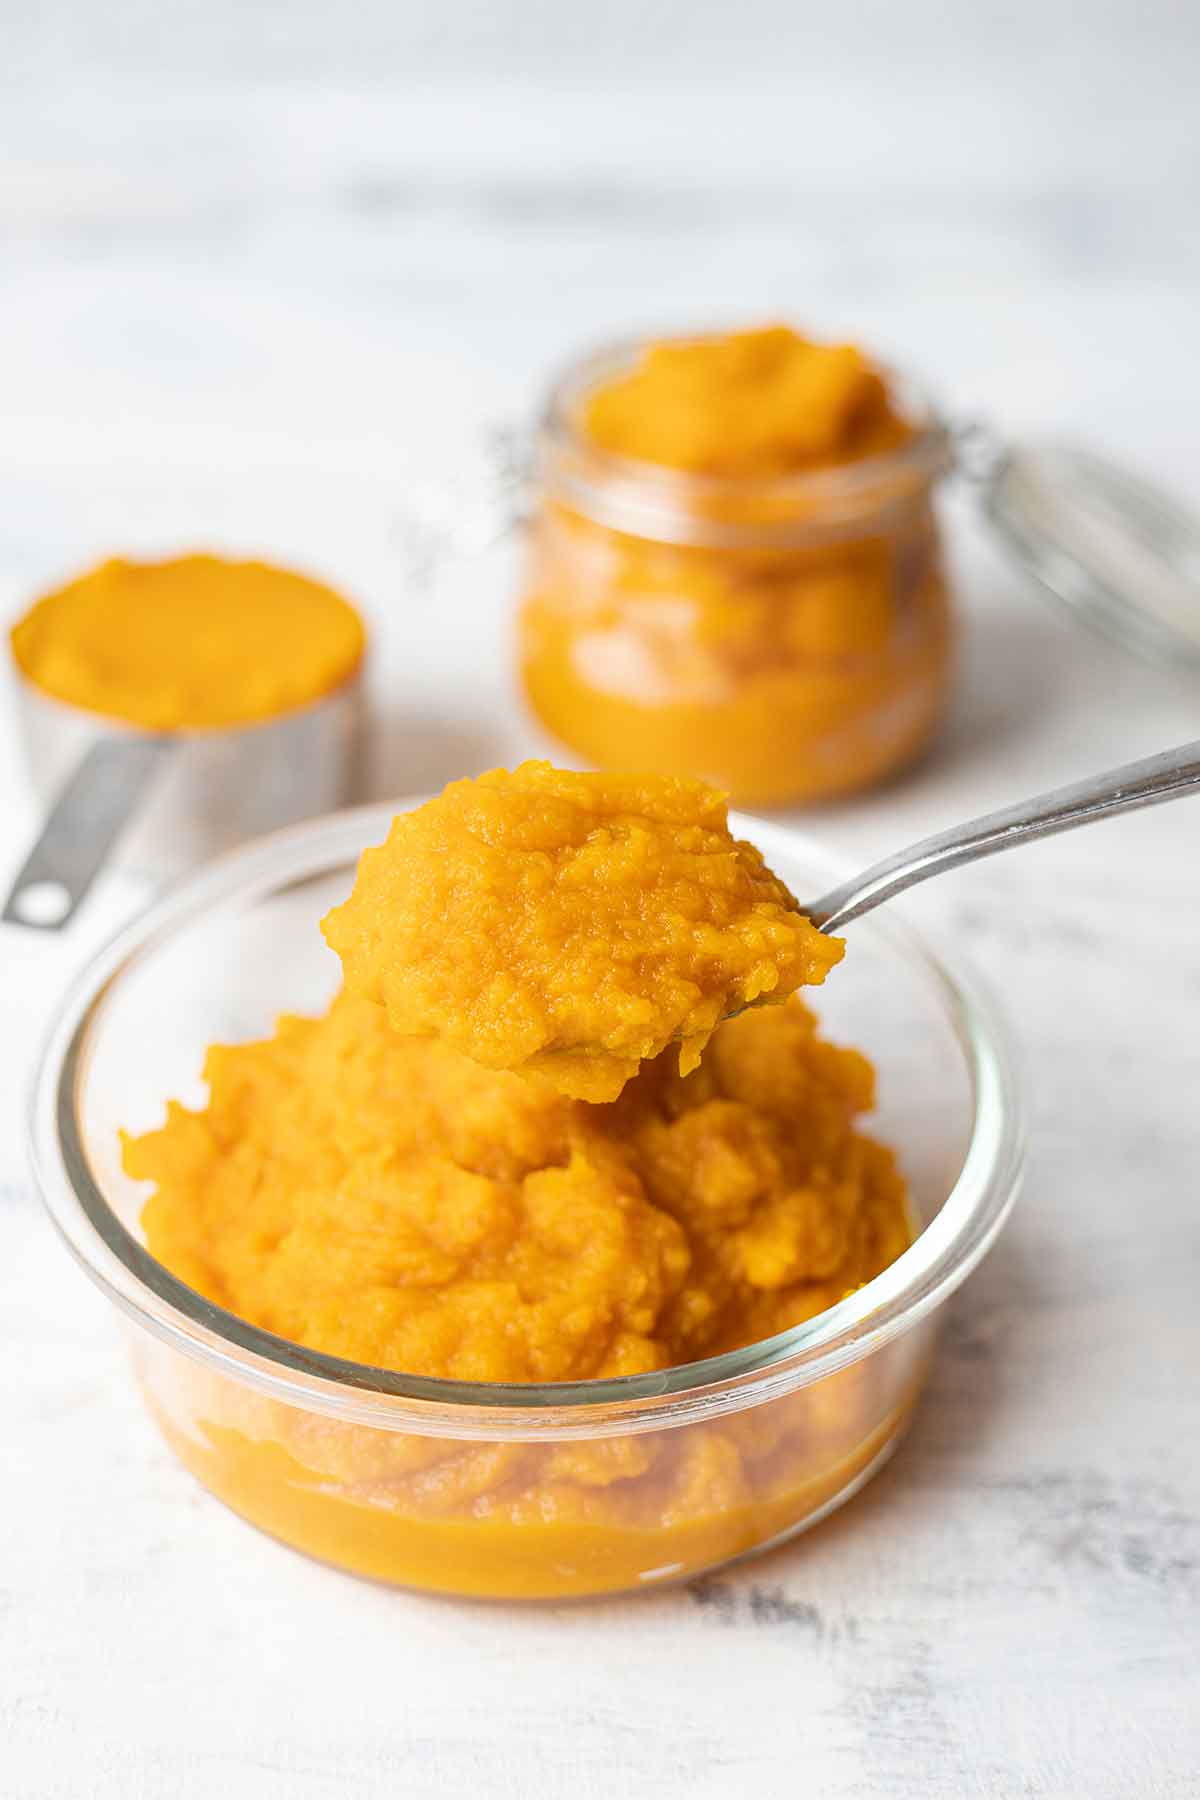 A spoonful of homemade pumpkin puree from scratch.